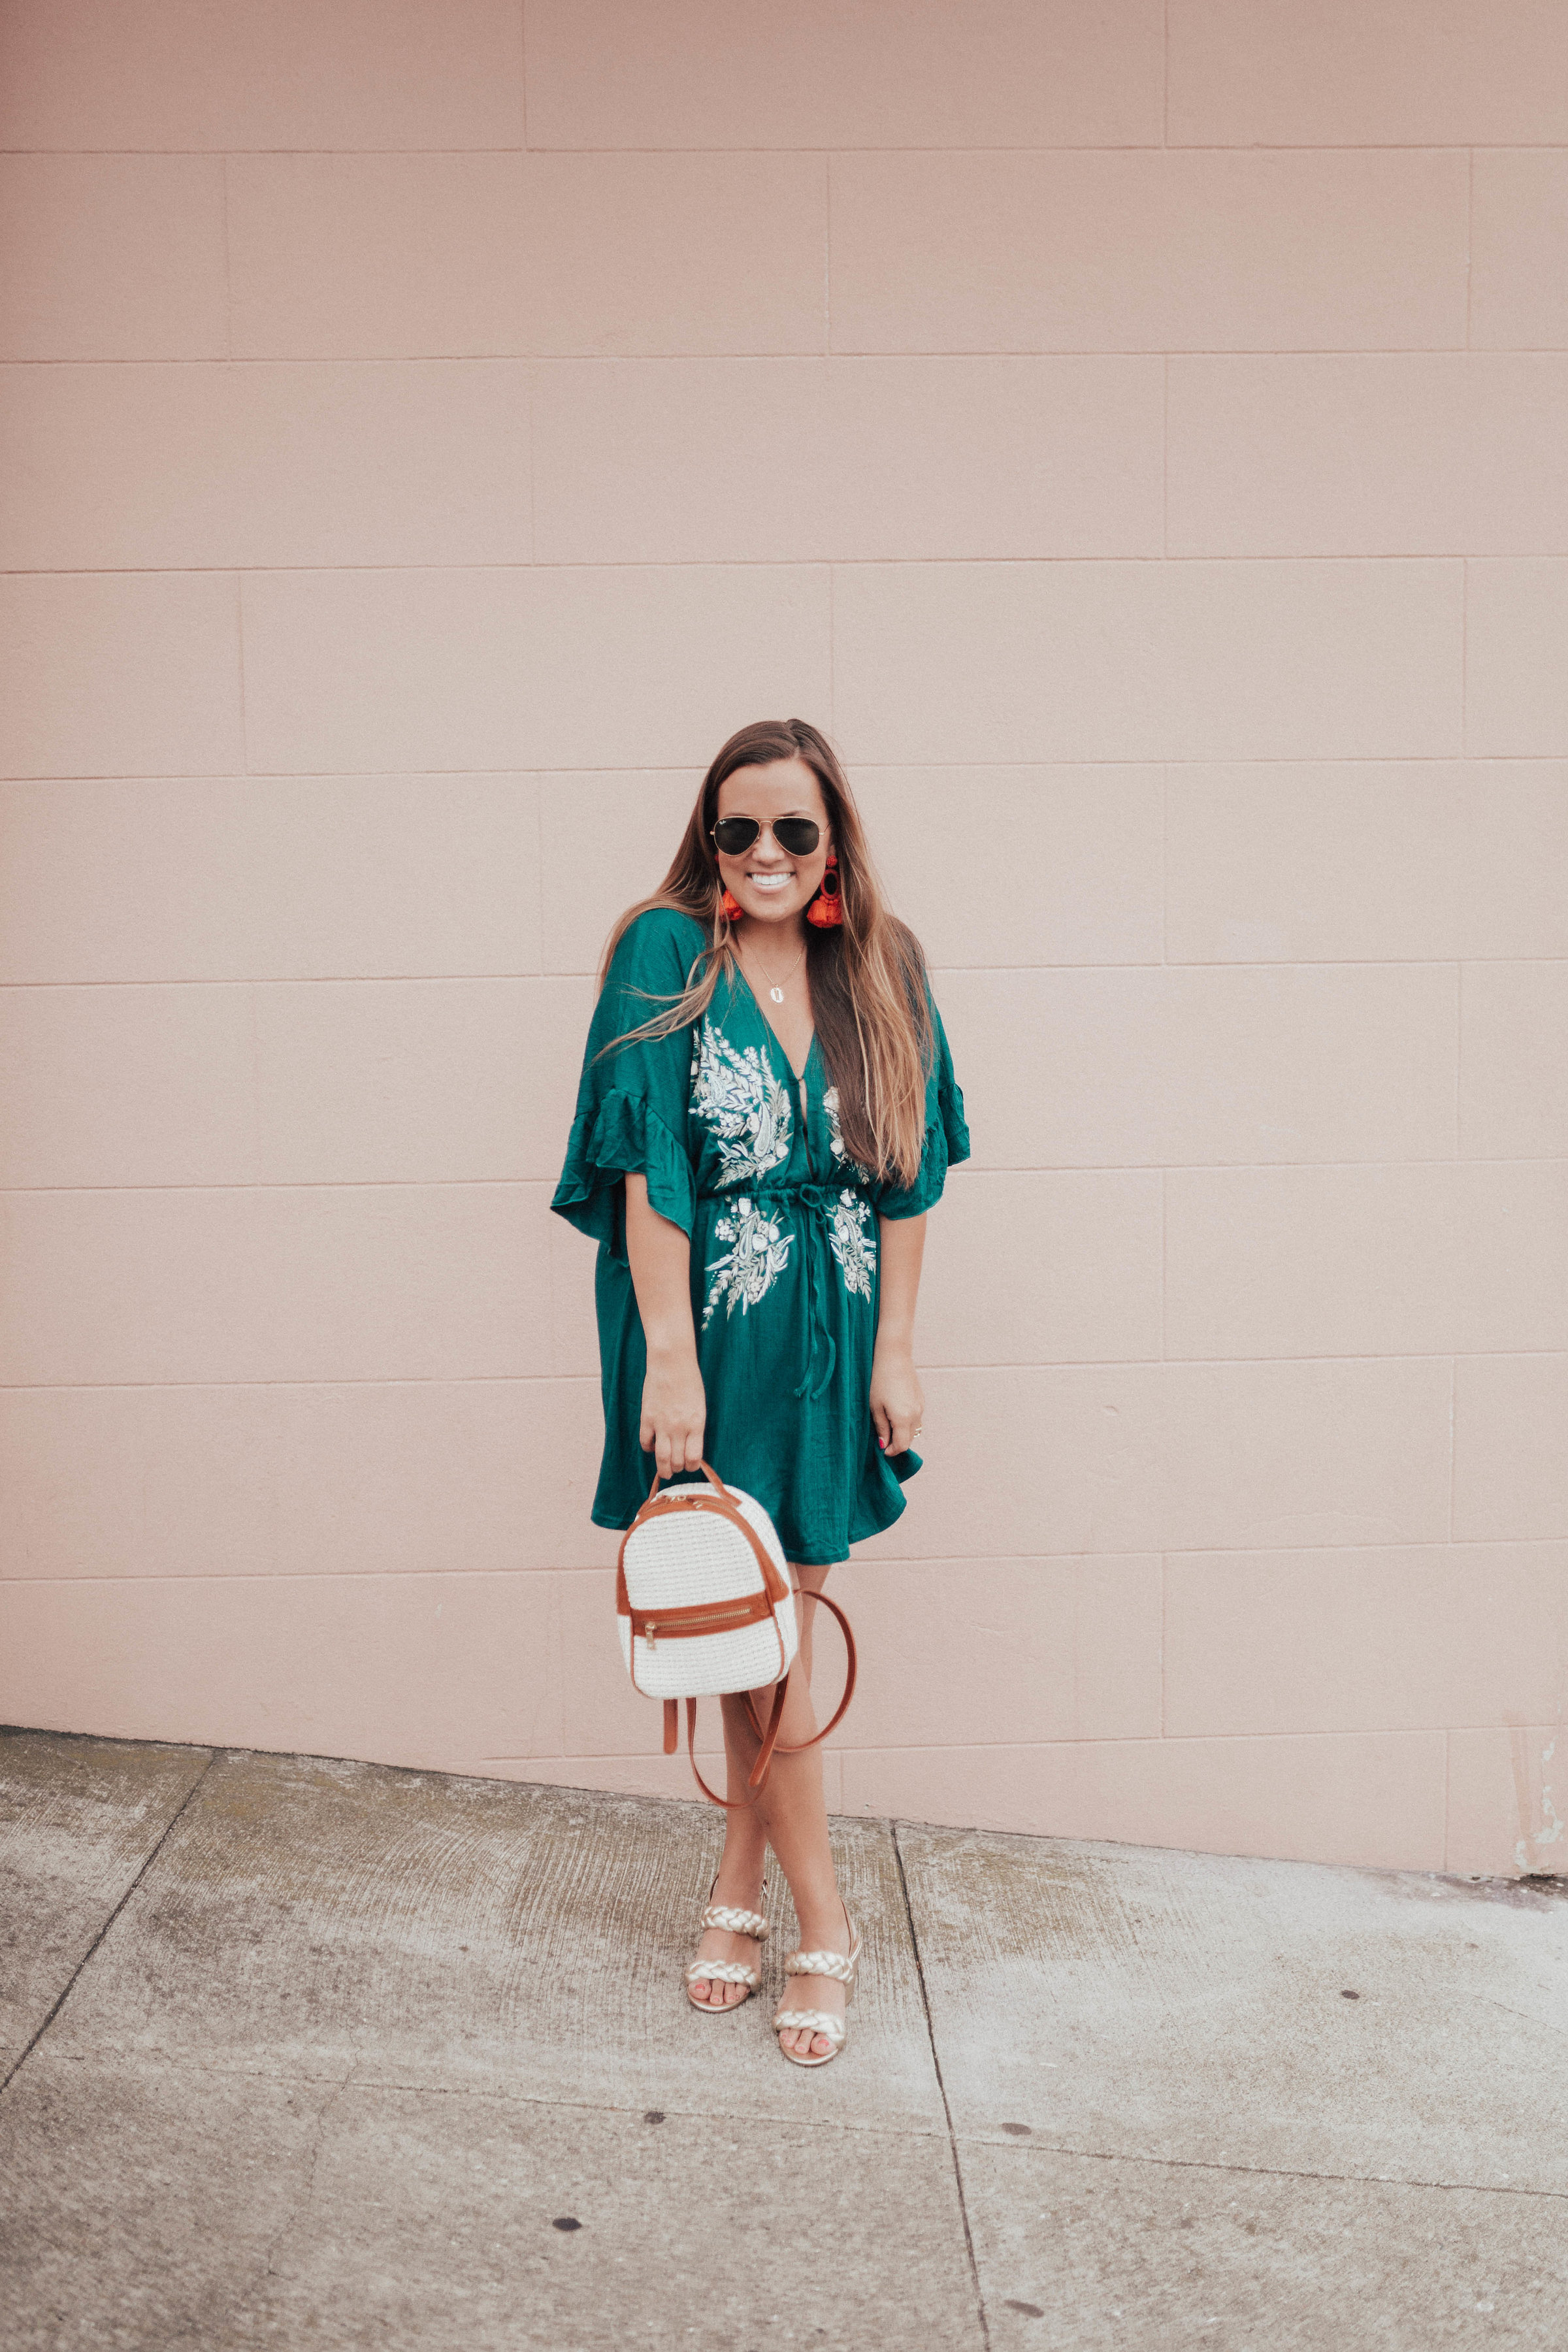 Ashley Zeal from Two Peas in a Prada shares Free People Dupe dresses in her first edition of splurge vs. save. Where she finds budget-friendly versions of your favorite trends. 